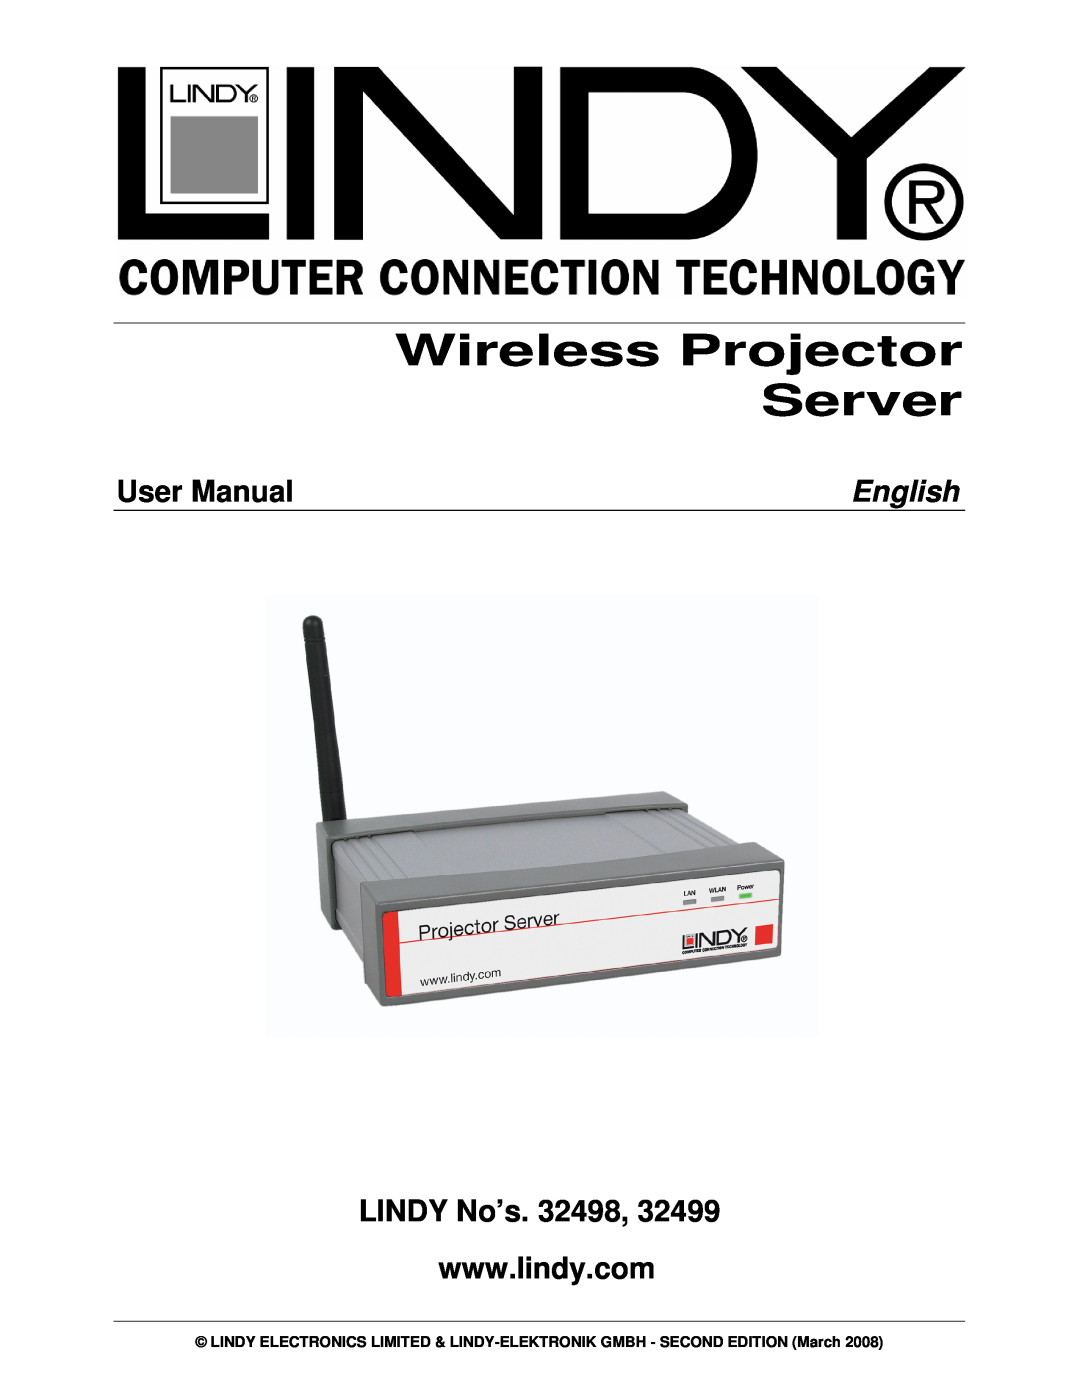 Lindy 32499 user manual Wireless Projector Server, User Manual, English, LINDY No’s. 32498 